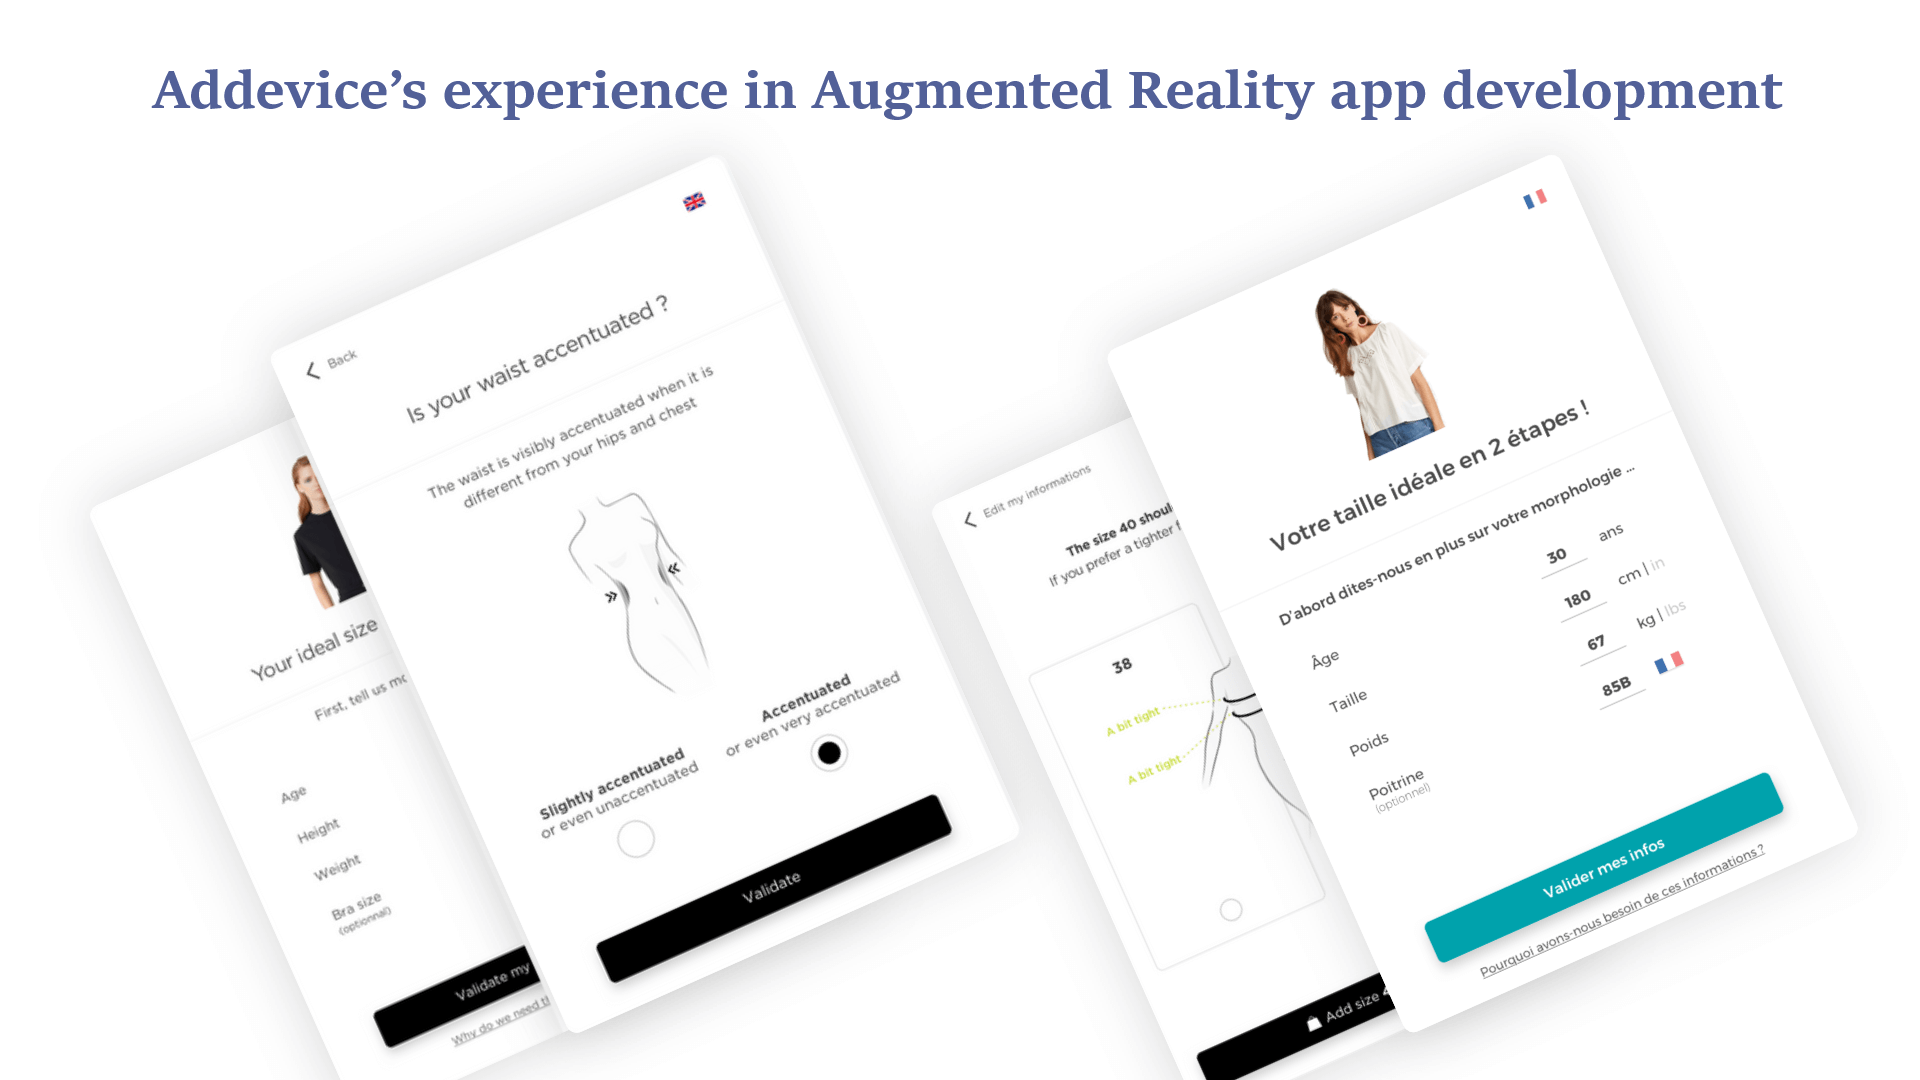 addevices-experience-in-augmented-reality-app-development